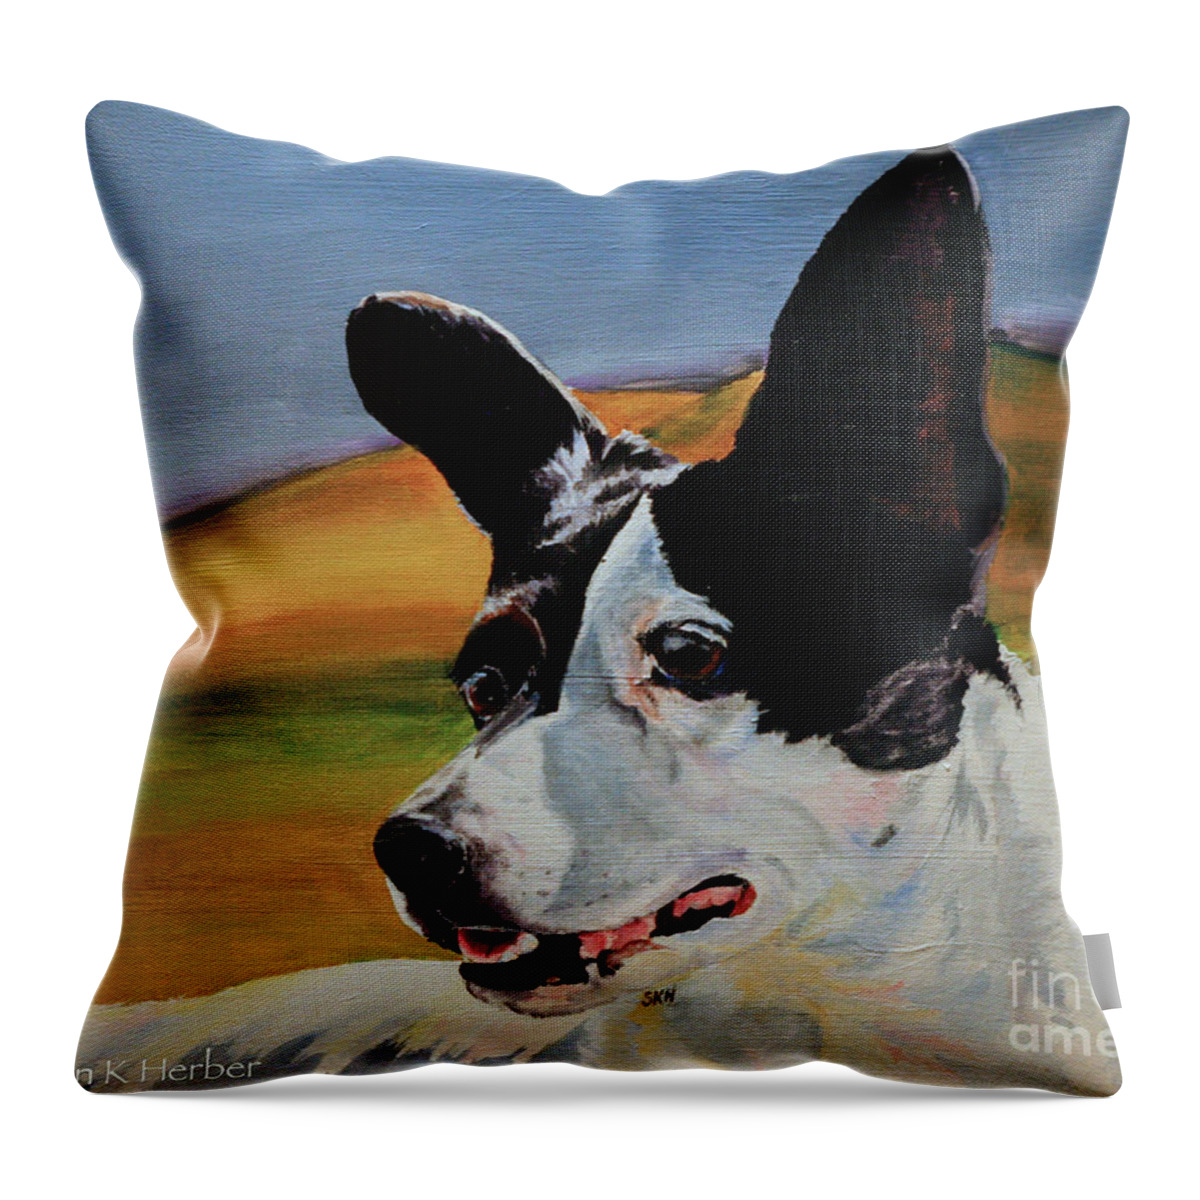 Dog Throw Pillow featuring the painting Mai Tai by Susan Herber